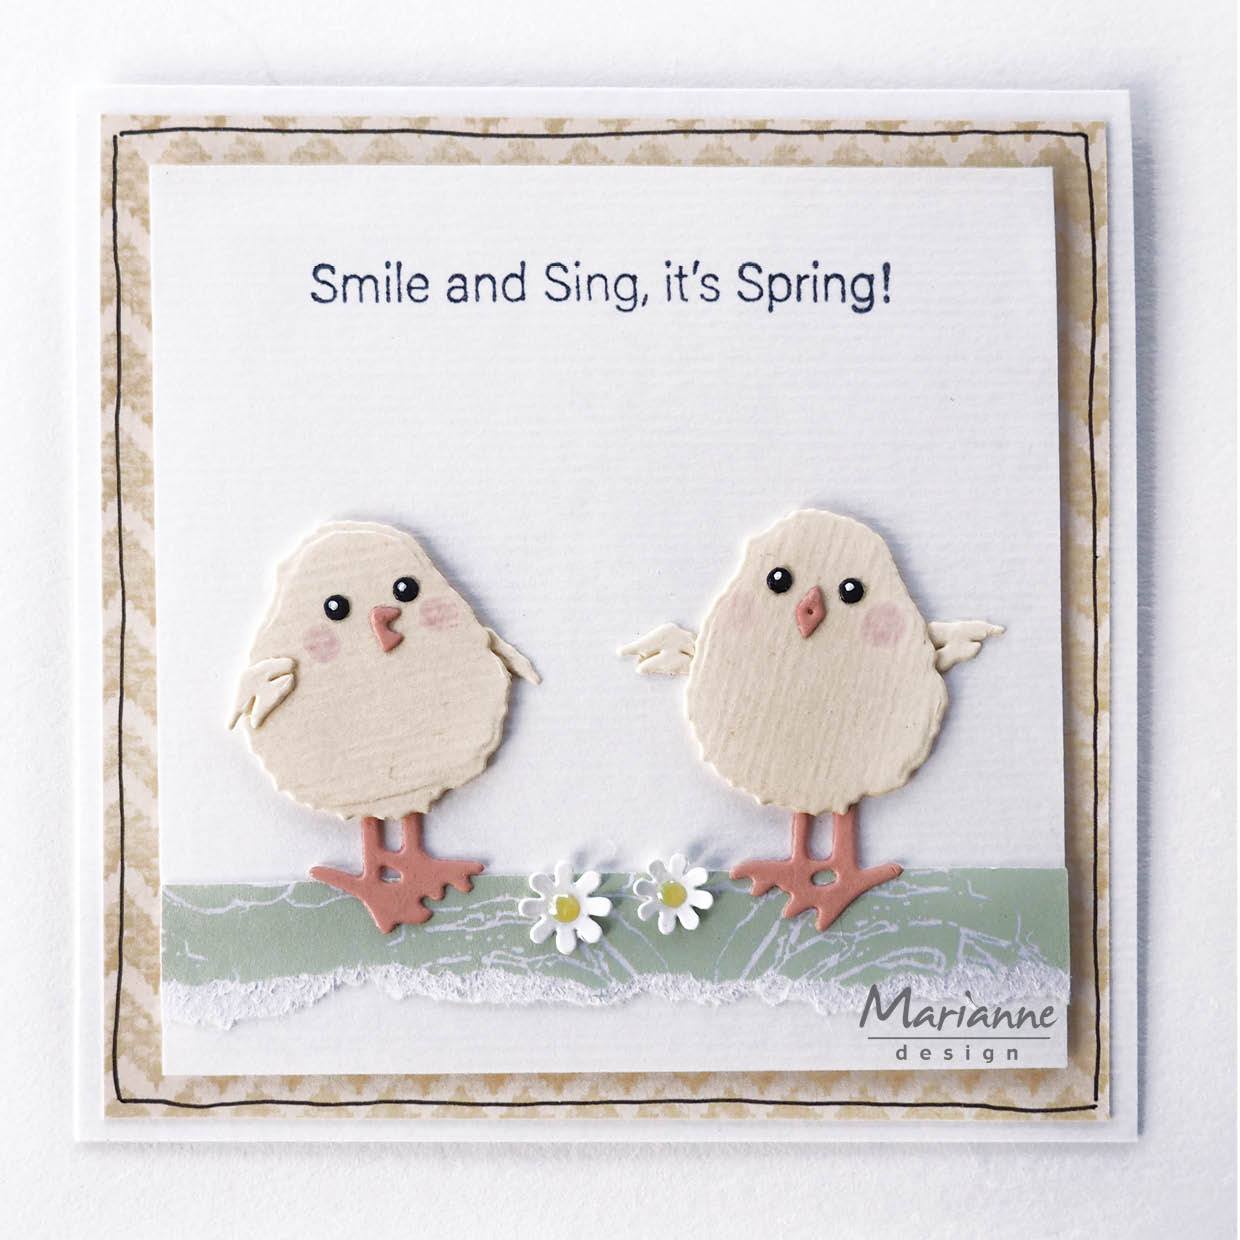 Marleen's Hello Spring & Easter Clear Stamps